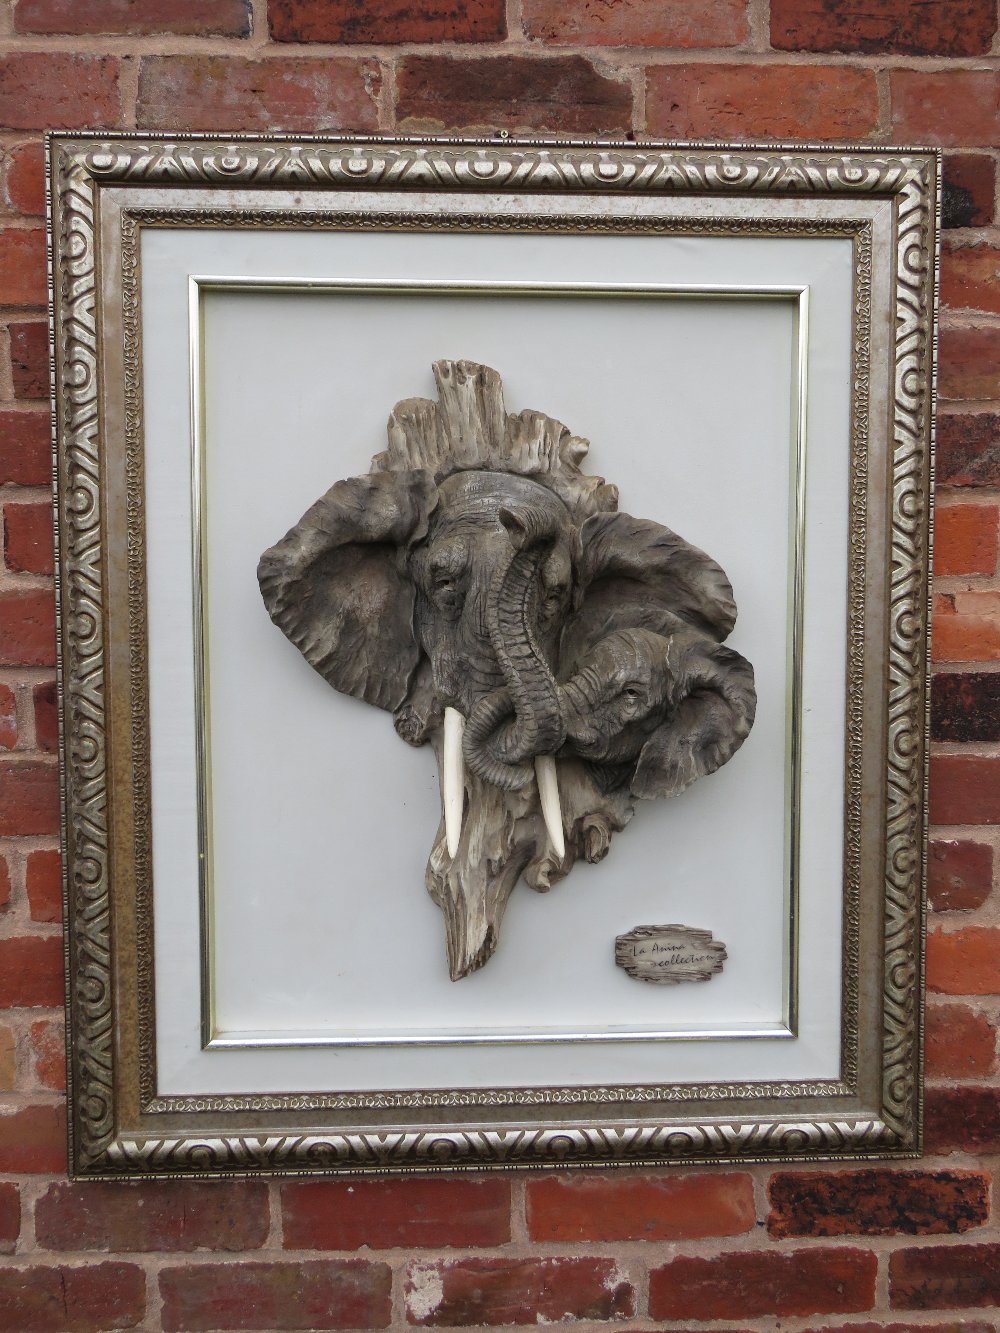 CROSA (XXI) - A RESIN SCULPTURE OF TWO ENTWINED ELEPHANT HEADS FORMING THE SHAPE OF AFRICA, - Image 3 of 8